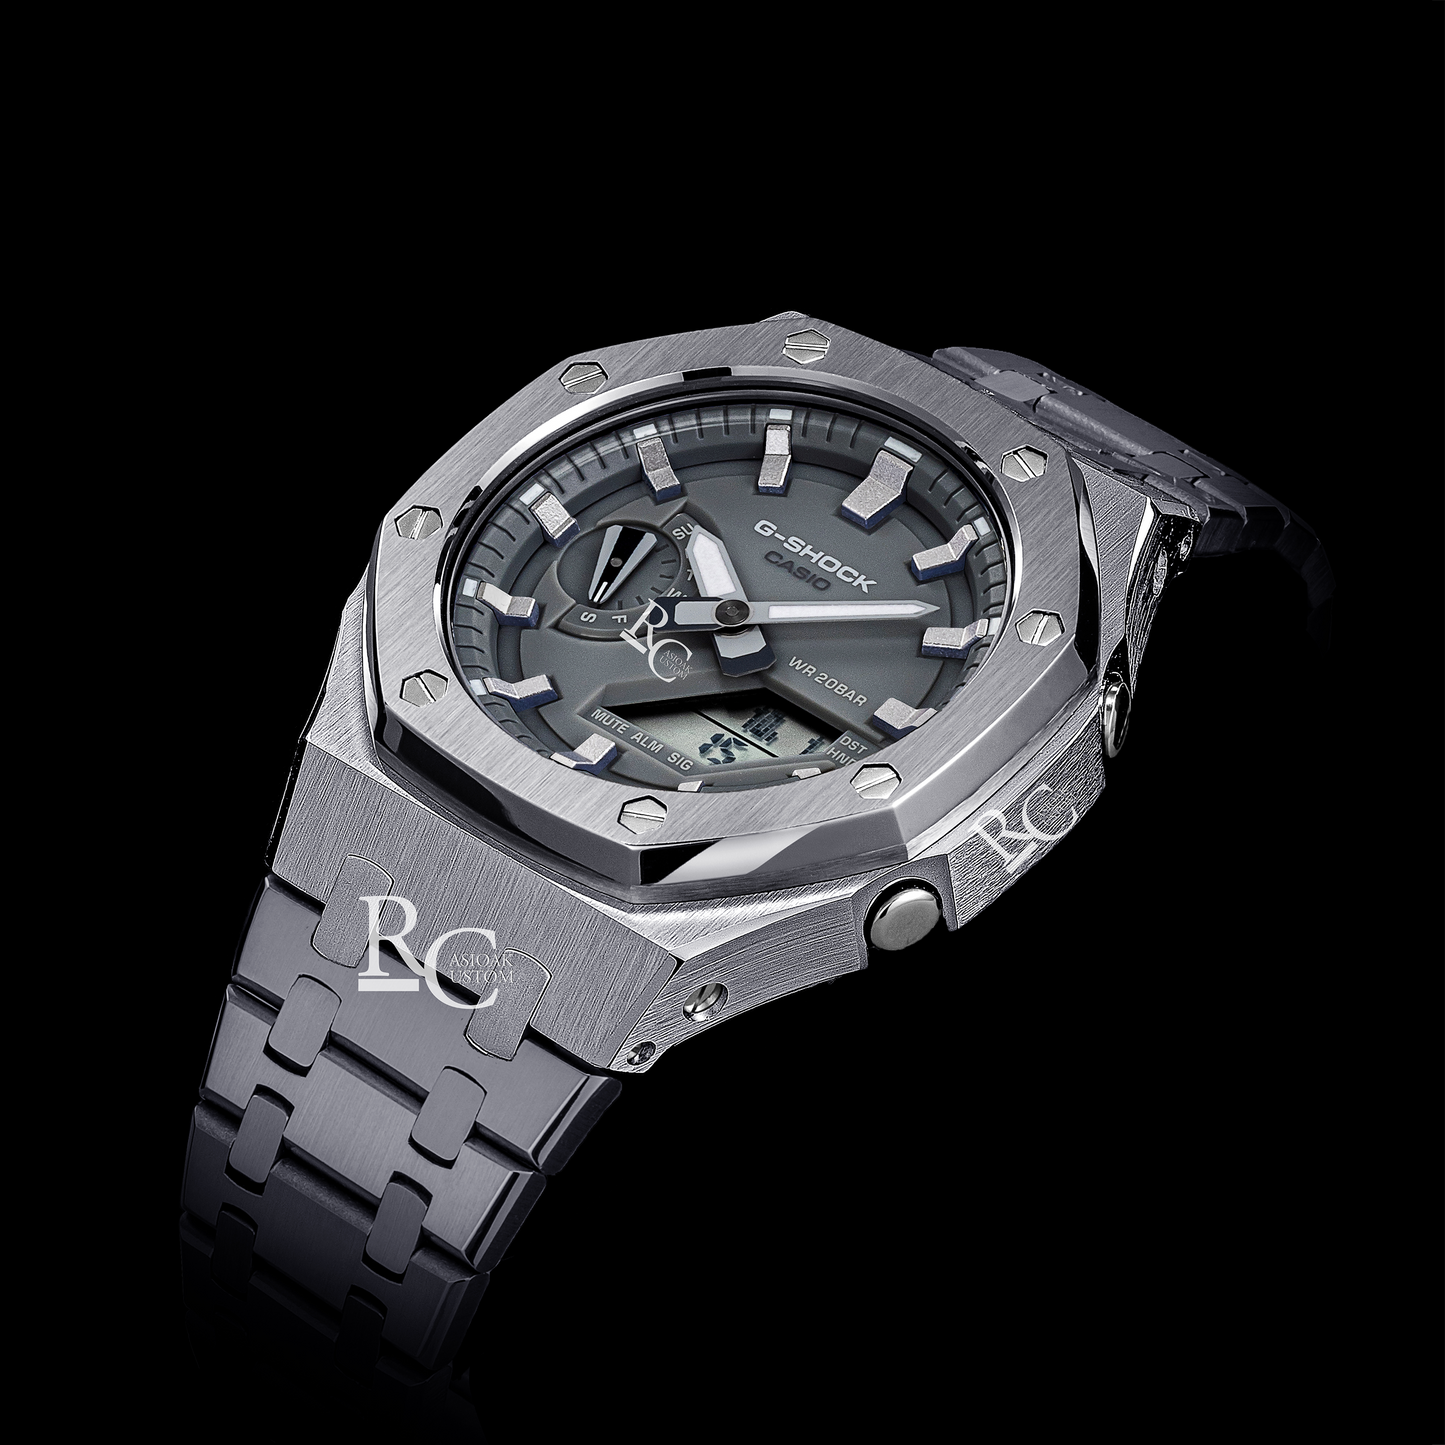 Gshock CasiOak Silver - Grey face (Silver Time Markers)